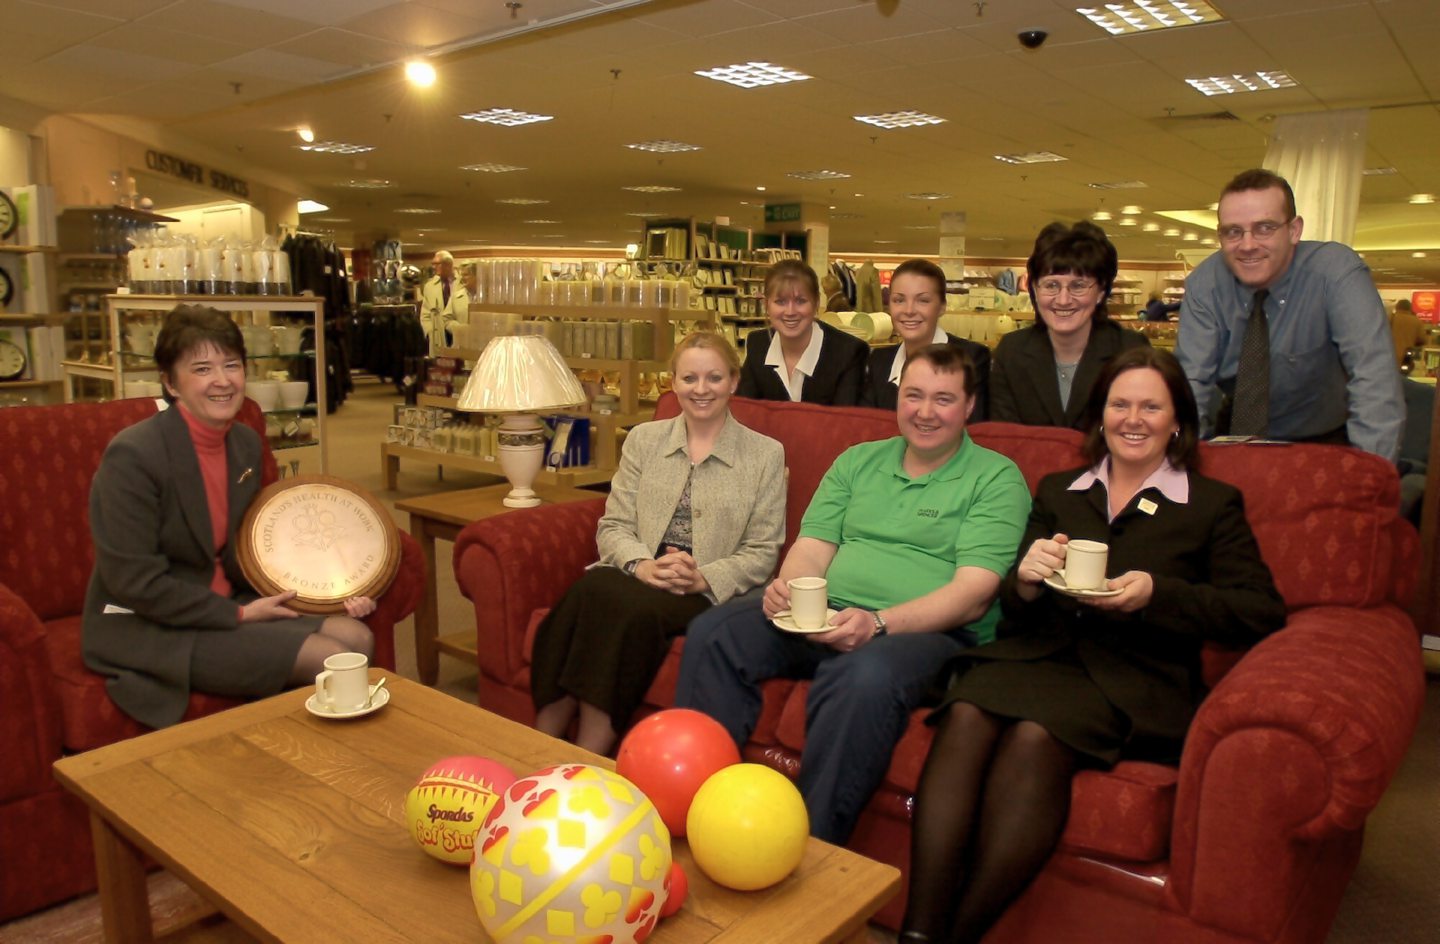 Some of Marks & Spencer staff sitting on and standing around a sofa and armchair set in the shop